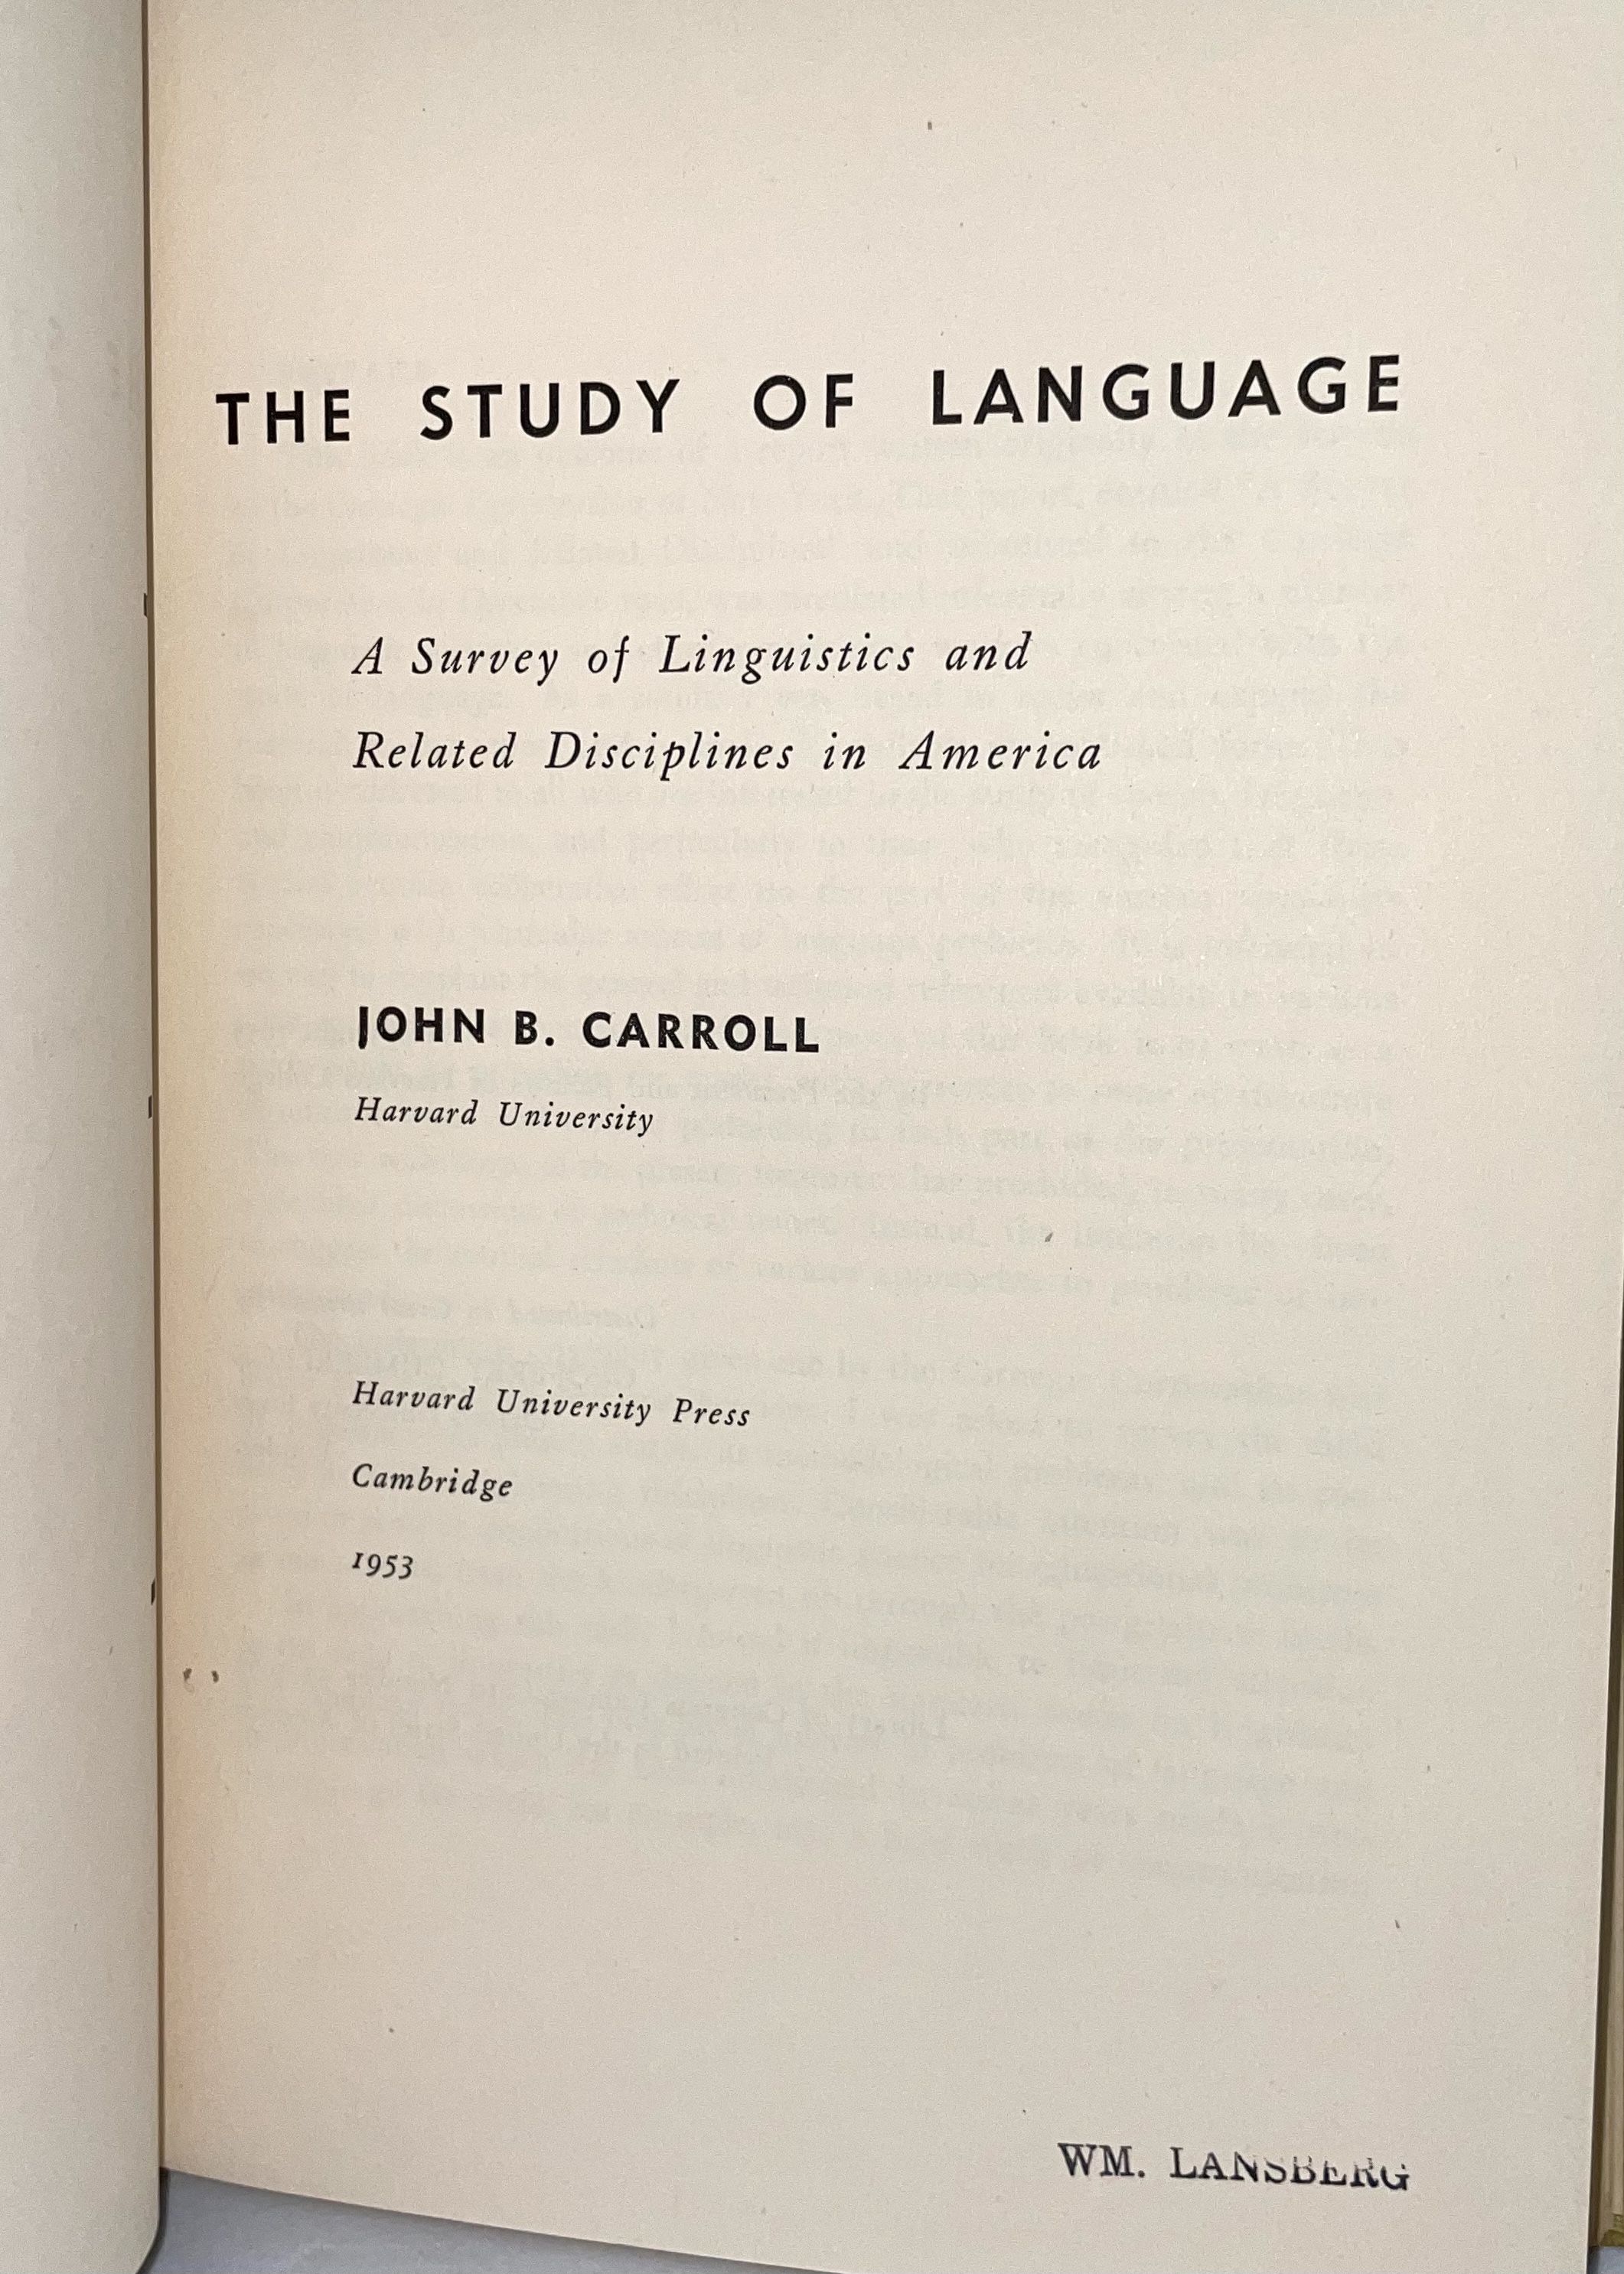 of　Linguistics　A　John　Pope　by　1st　Edition　Survey　Disciplines　Hardcover　Study　Good　America　Related　Dan　Carroll:　in　B.　and　(1953)　of　The　Very　Language:　Books